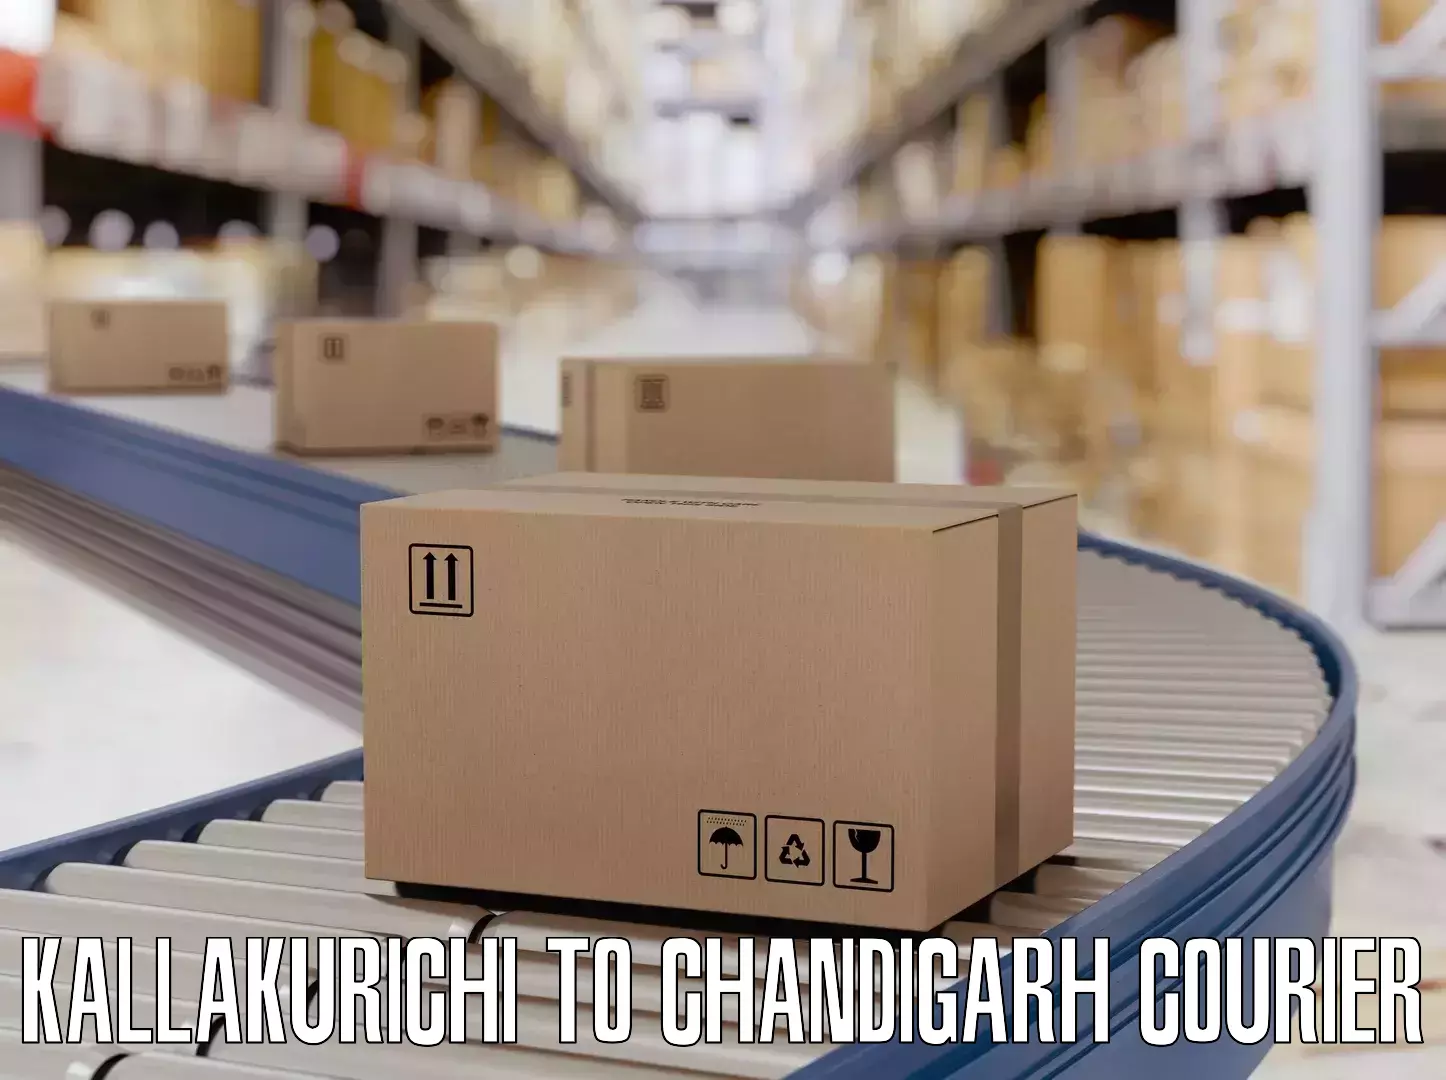 Reliable luggage courier in Kallakurichi to Chandigarh